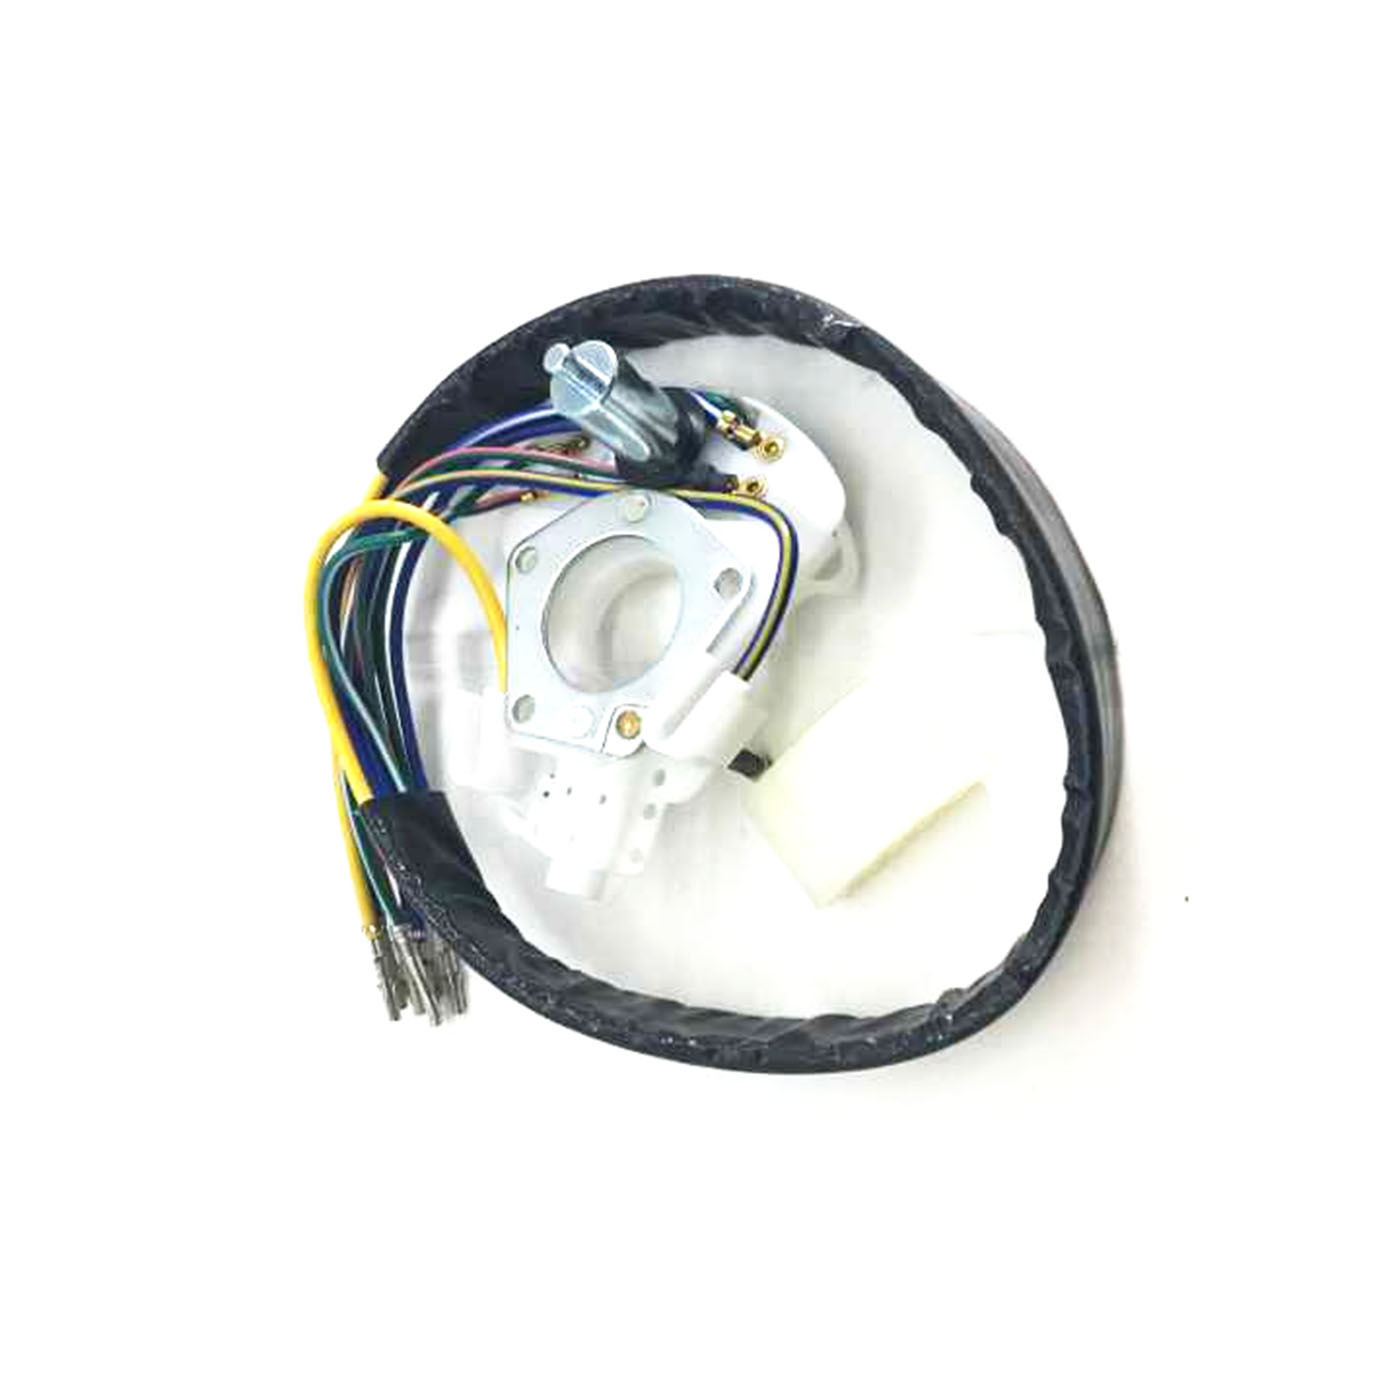 FORD XY INDICATOR SWITCH WITH WIRING